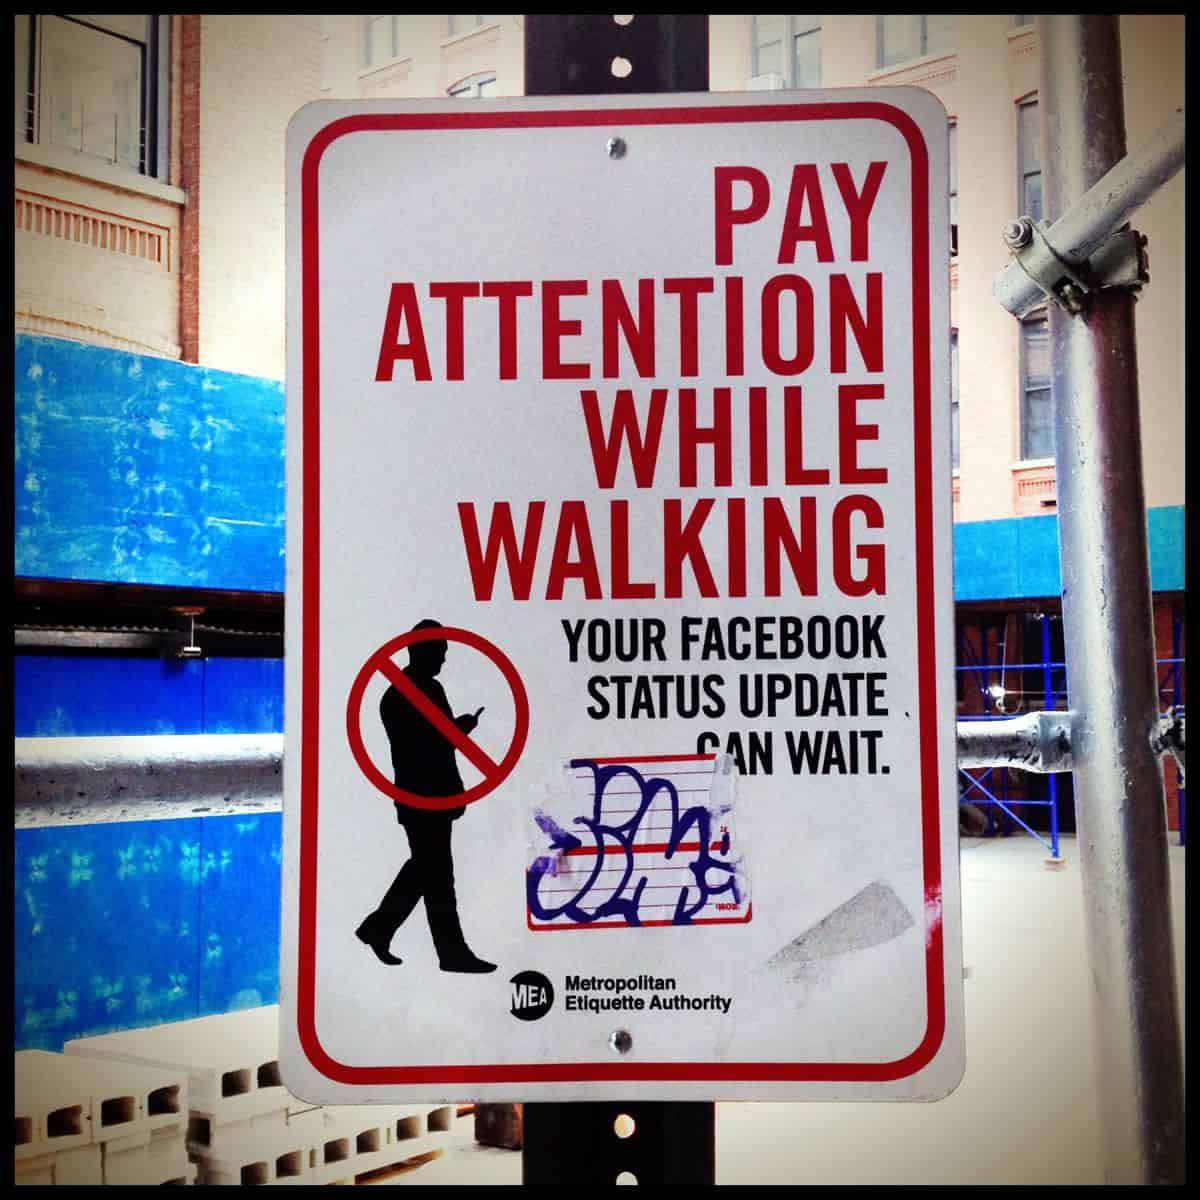 A street sign shows the silhouette of a person walking while using his mobile phone, with the message, “Pay attention while walking. Your Facebook status update can wait.”